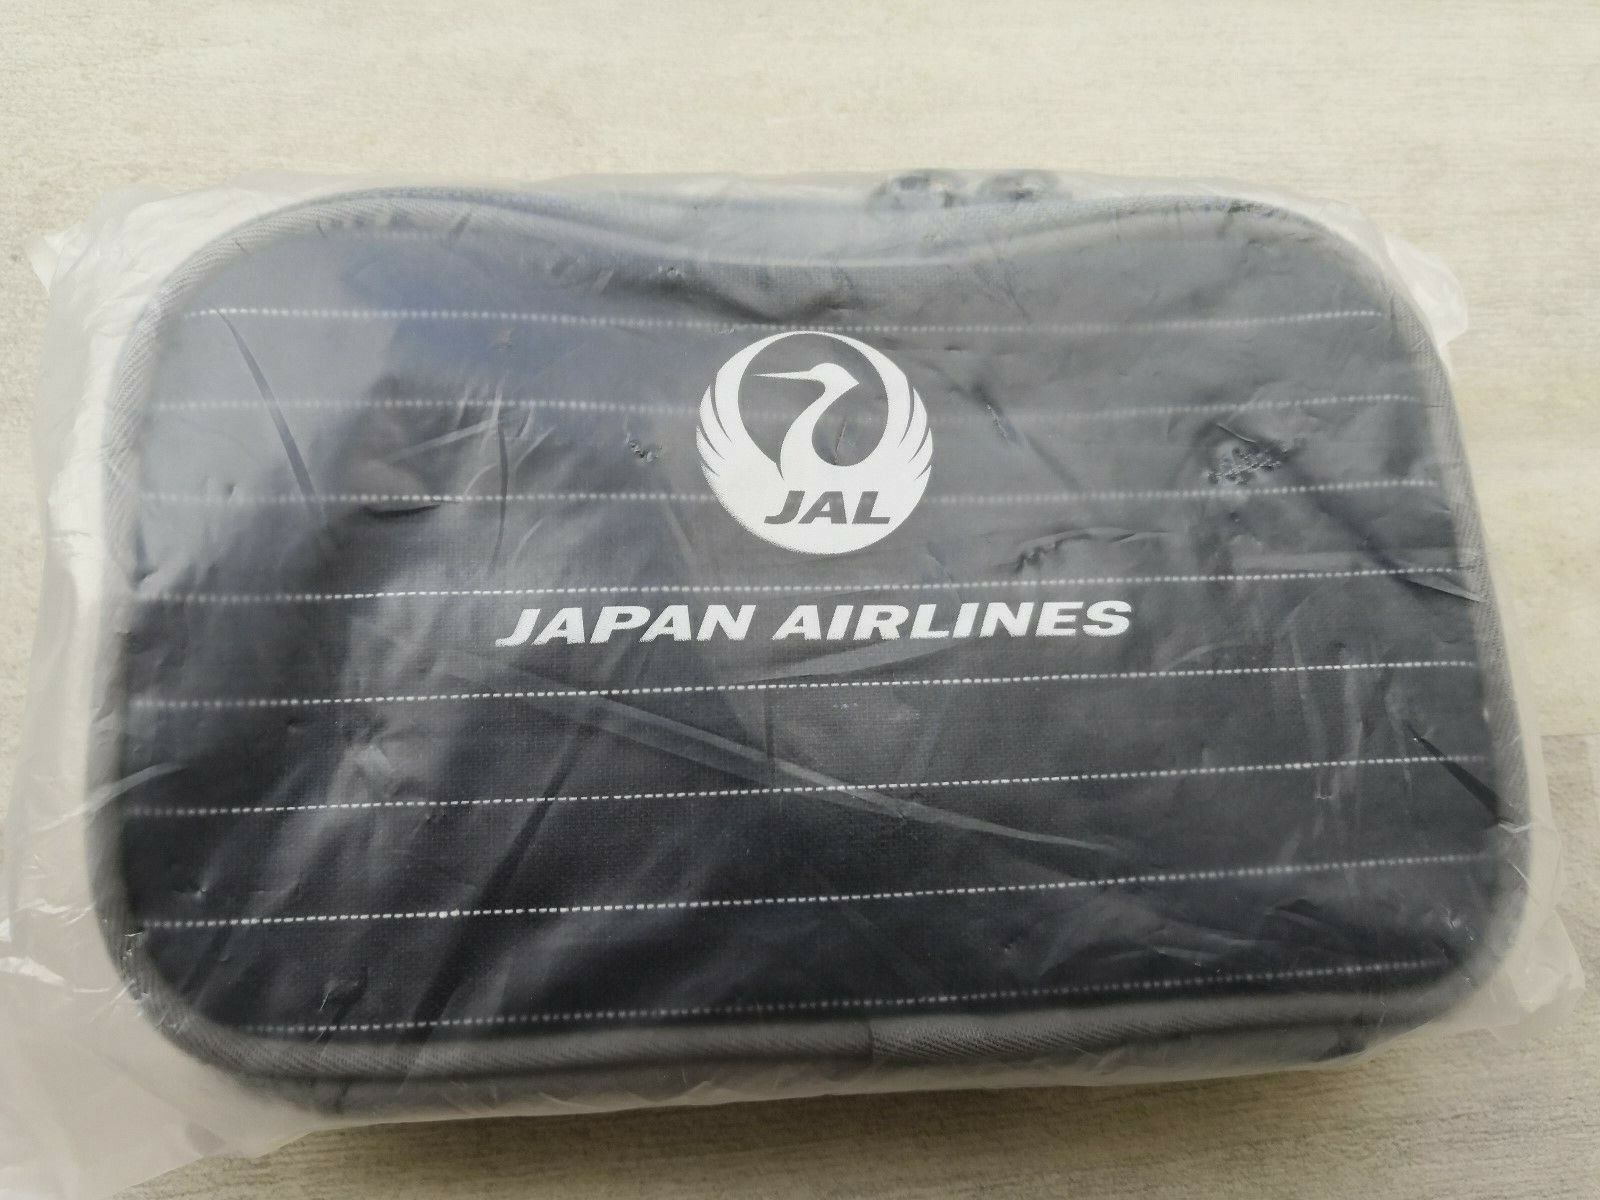 Japan Airlines Business Class Beam Amenity Kit in blue/white